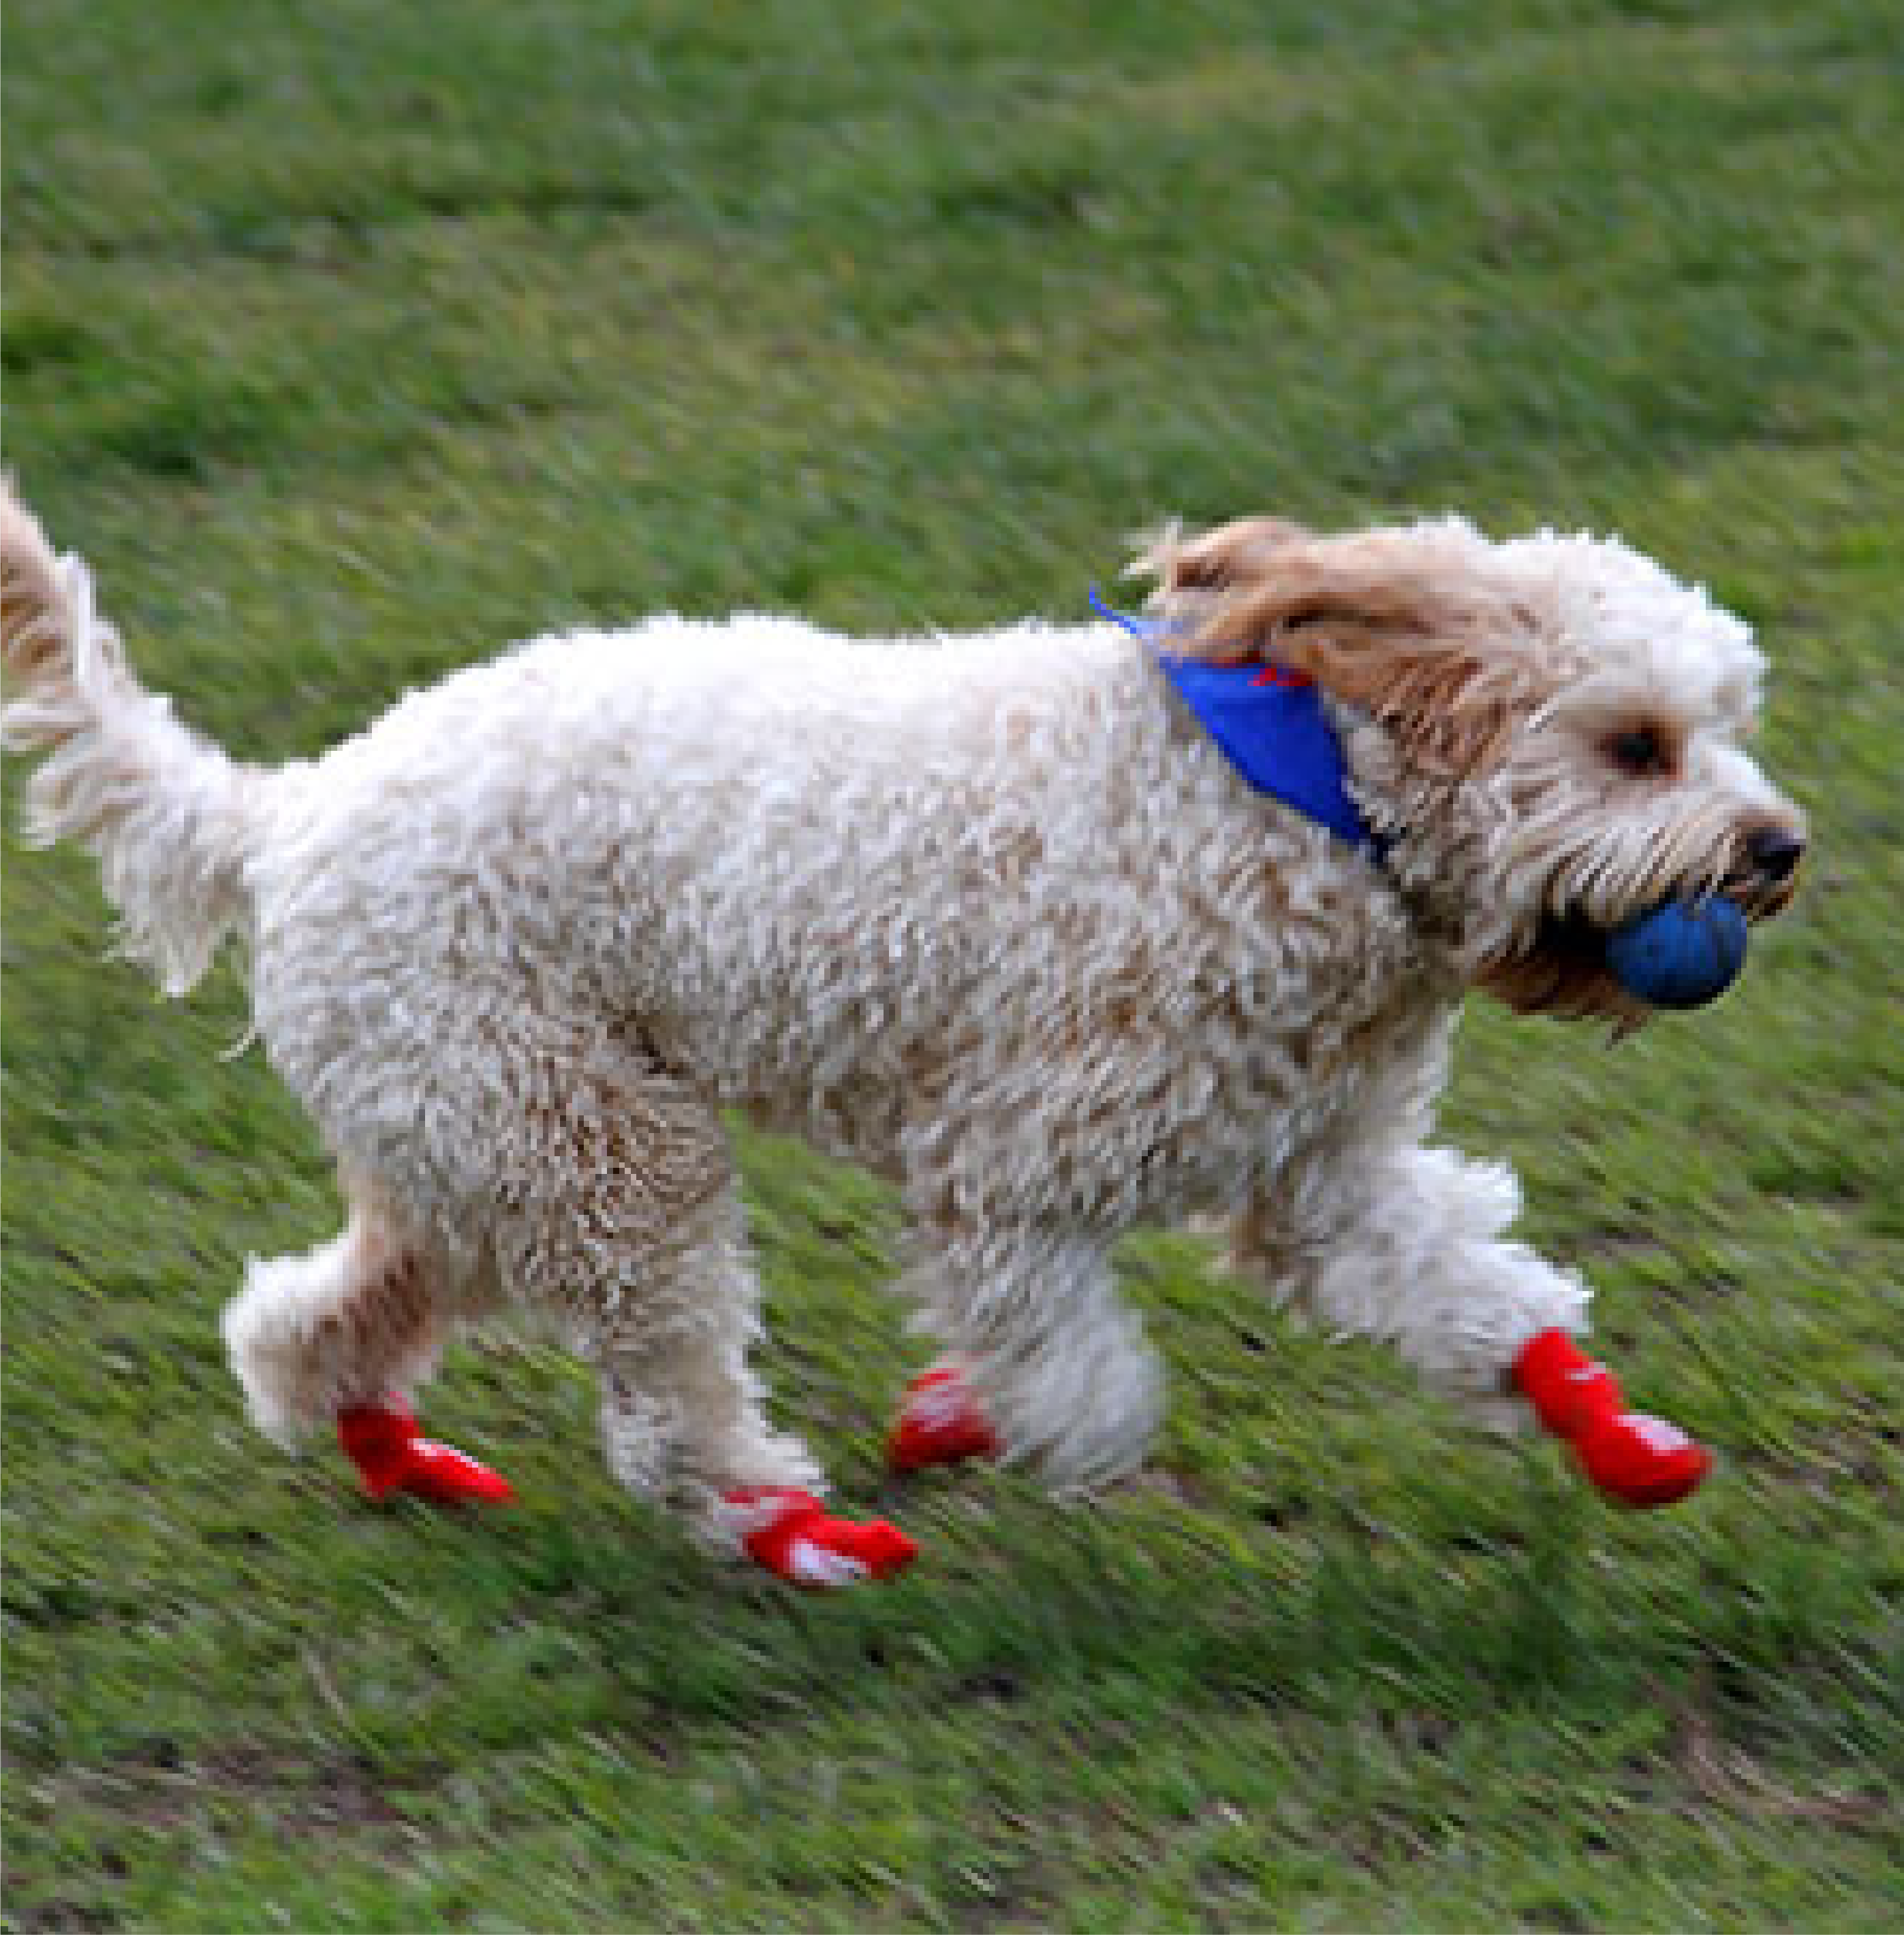 Dog with red socks